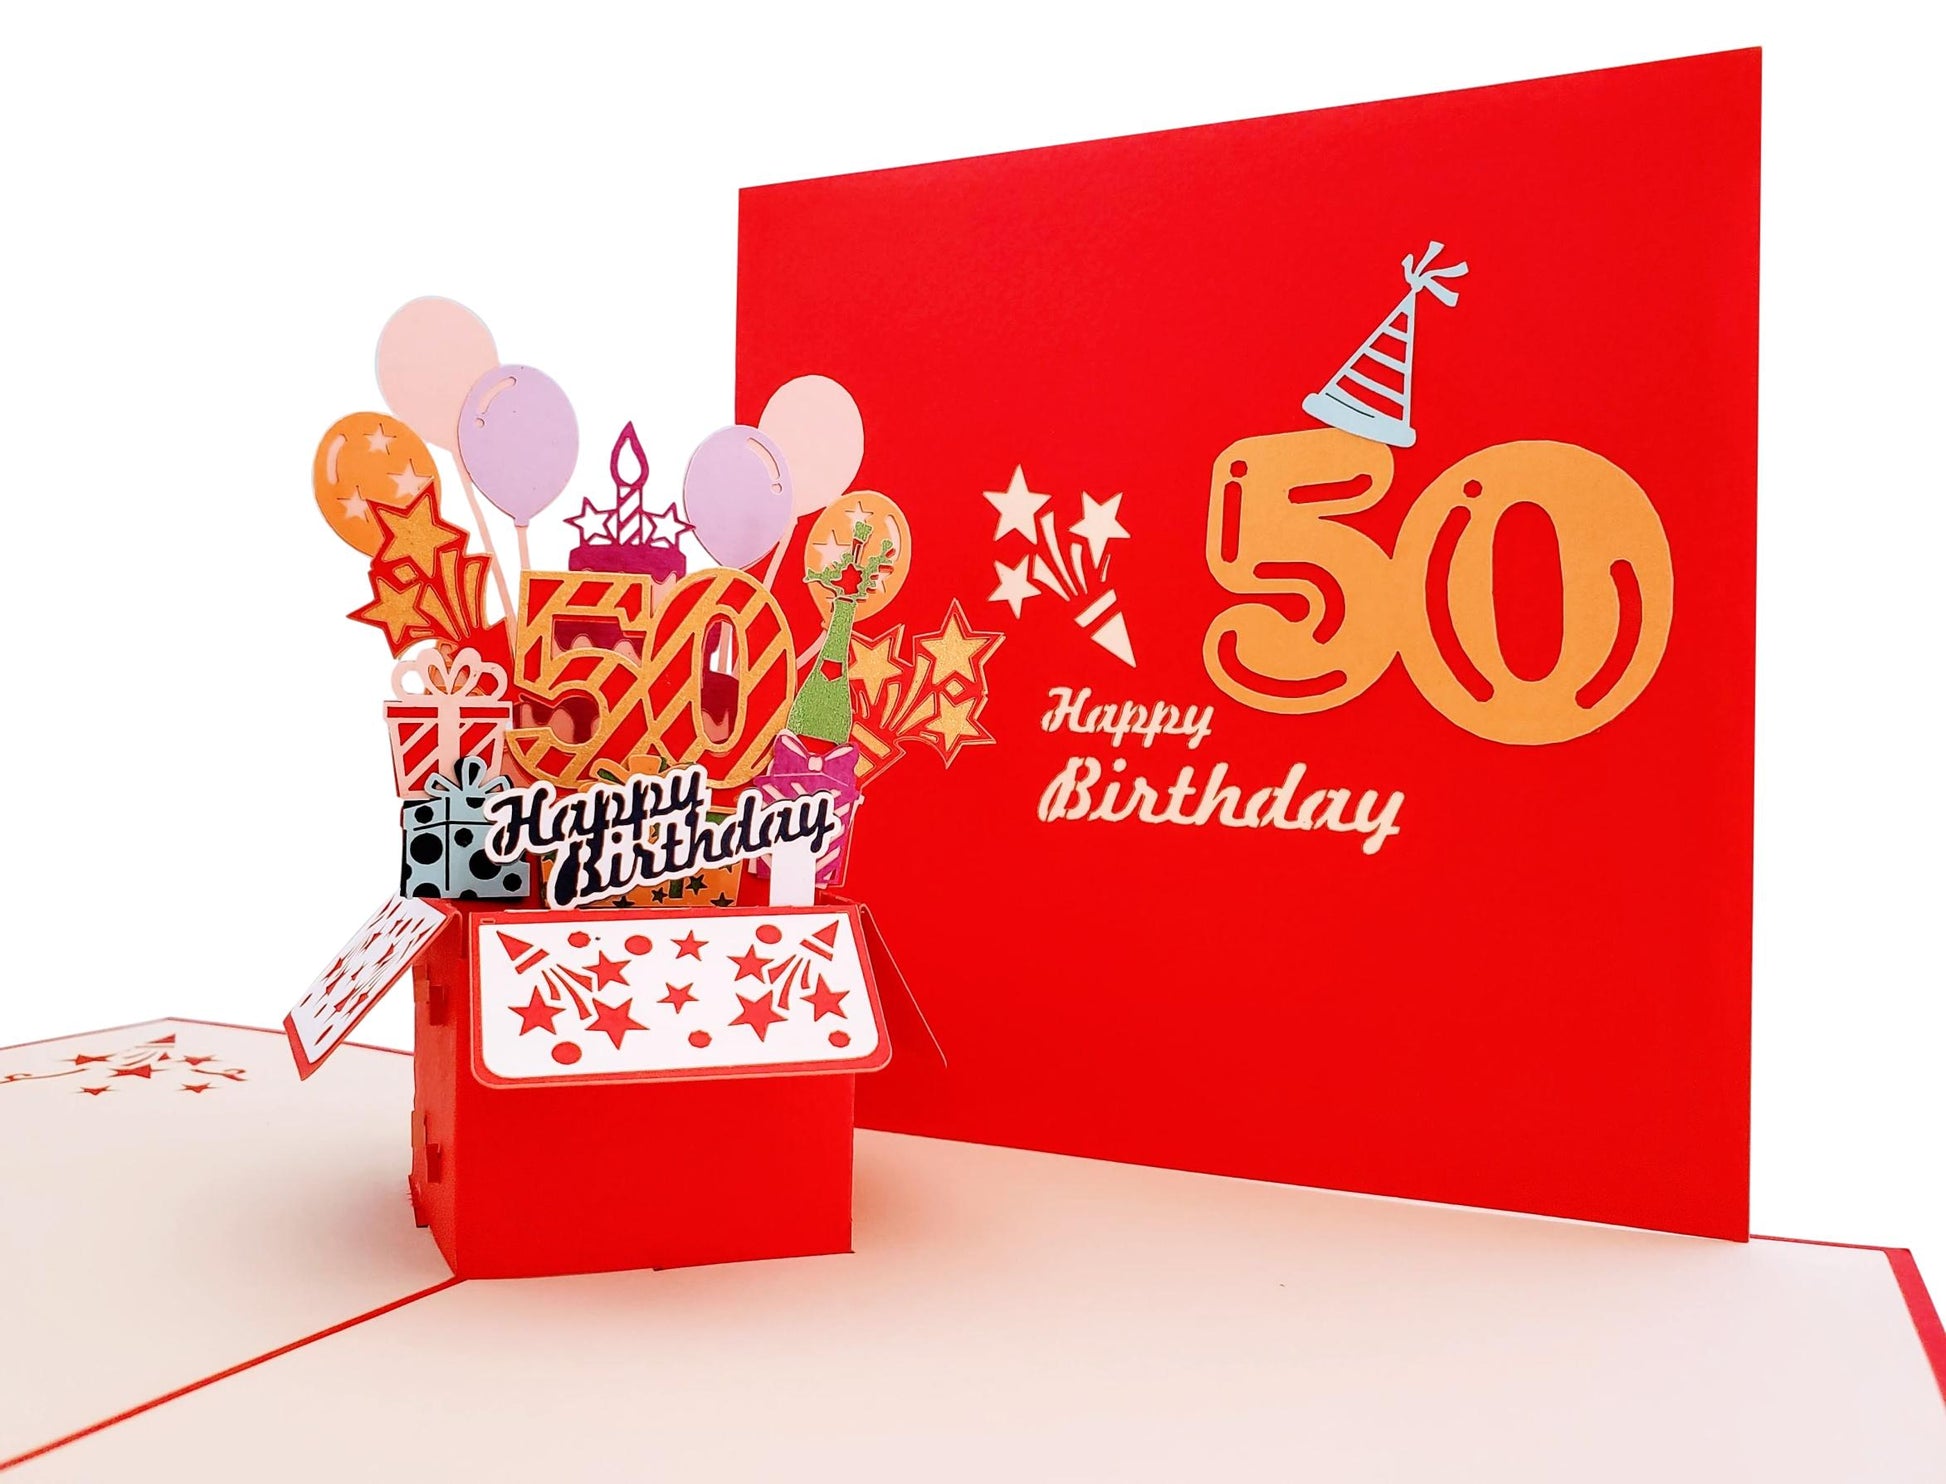 Happy 50th Birthday Red Party Box 3D Pop Up Greeting Card - Birthday - Fun - Milestone - Special Day - iGifts And Cards